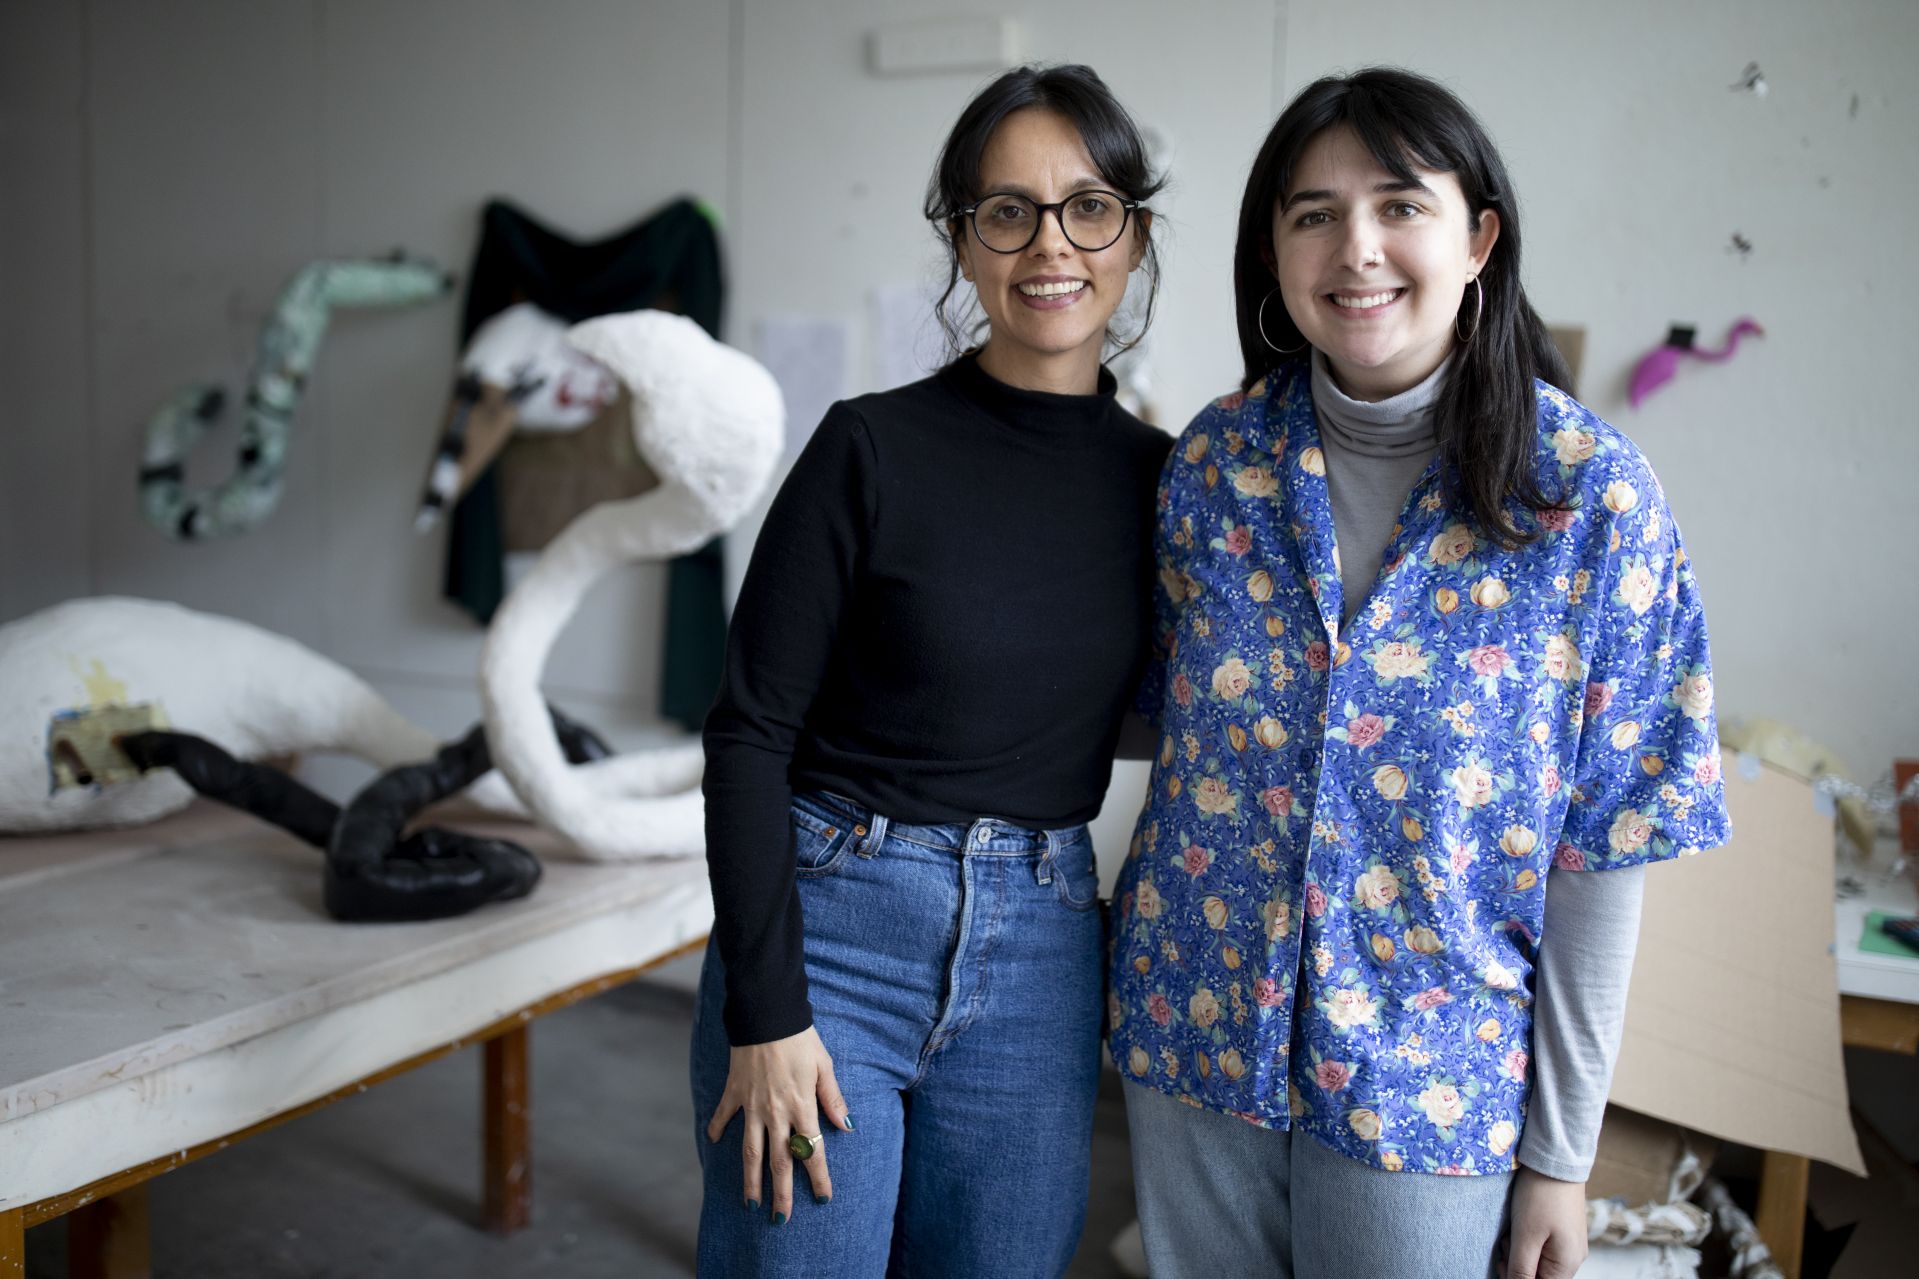 Eden Rickolt ‘20 of Landenberg, Pa., with Carolina Gonzalez Valencia, assistant professor of art and visual culture, in Rickolt's visual art senior thesis studio on the ground floor of the Olin Arts Center.